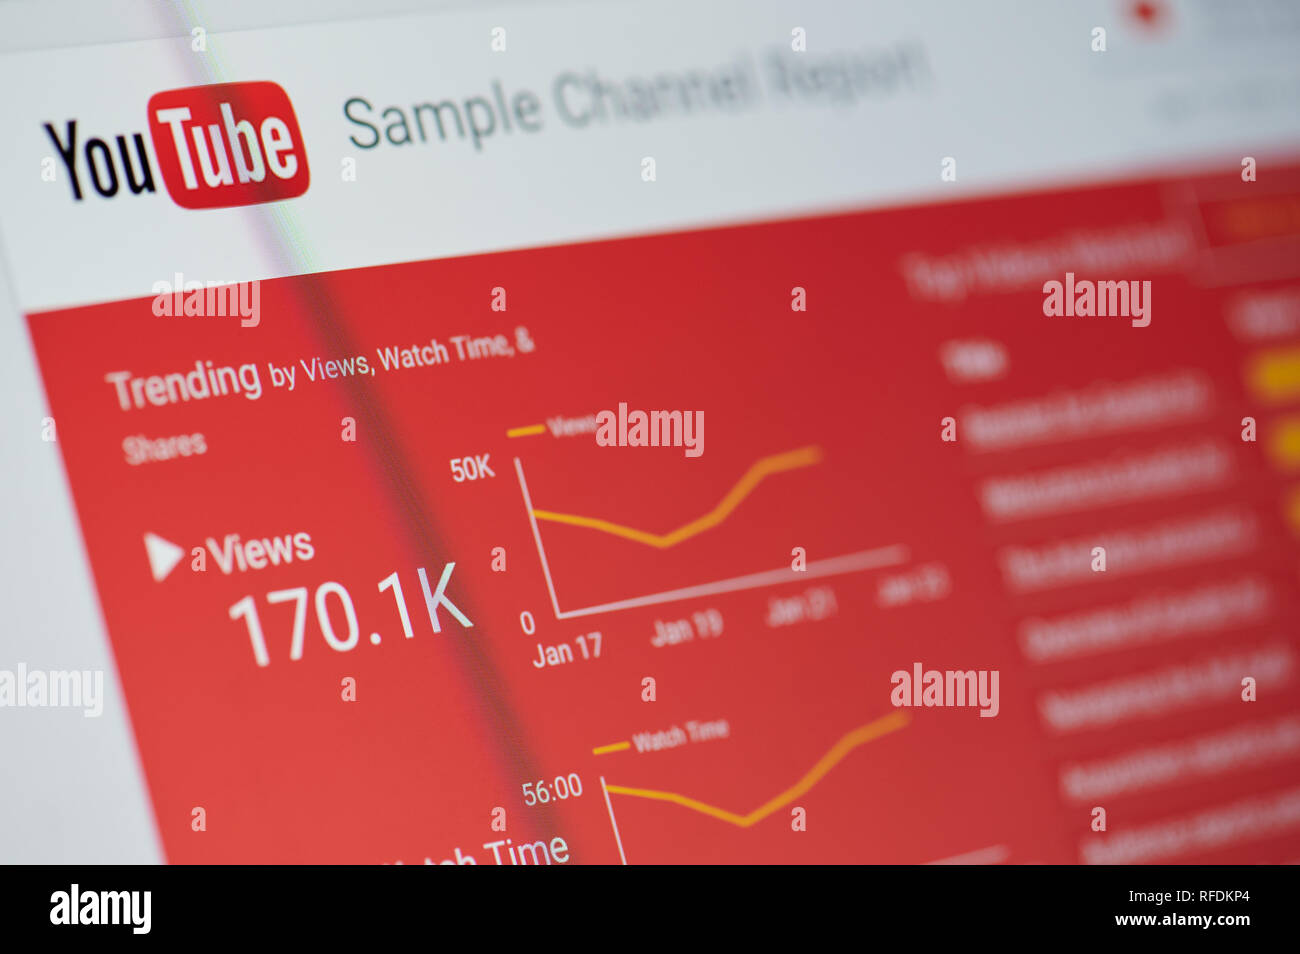 New york, USA - january 24, 2019: Youtube sample channel report menu on device screen pixelated close up view Stock Photo